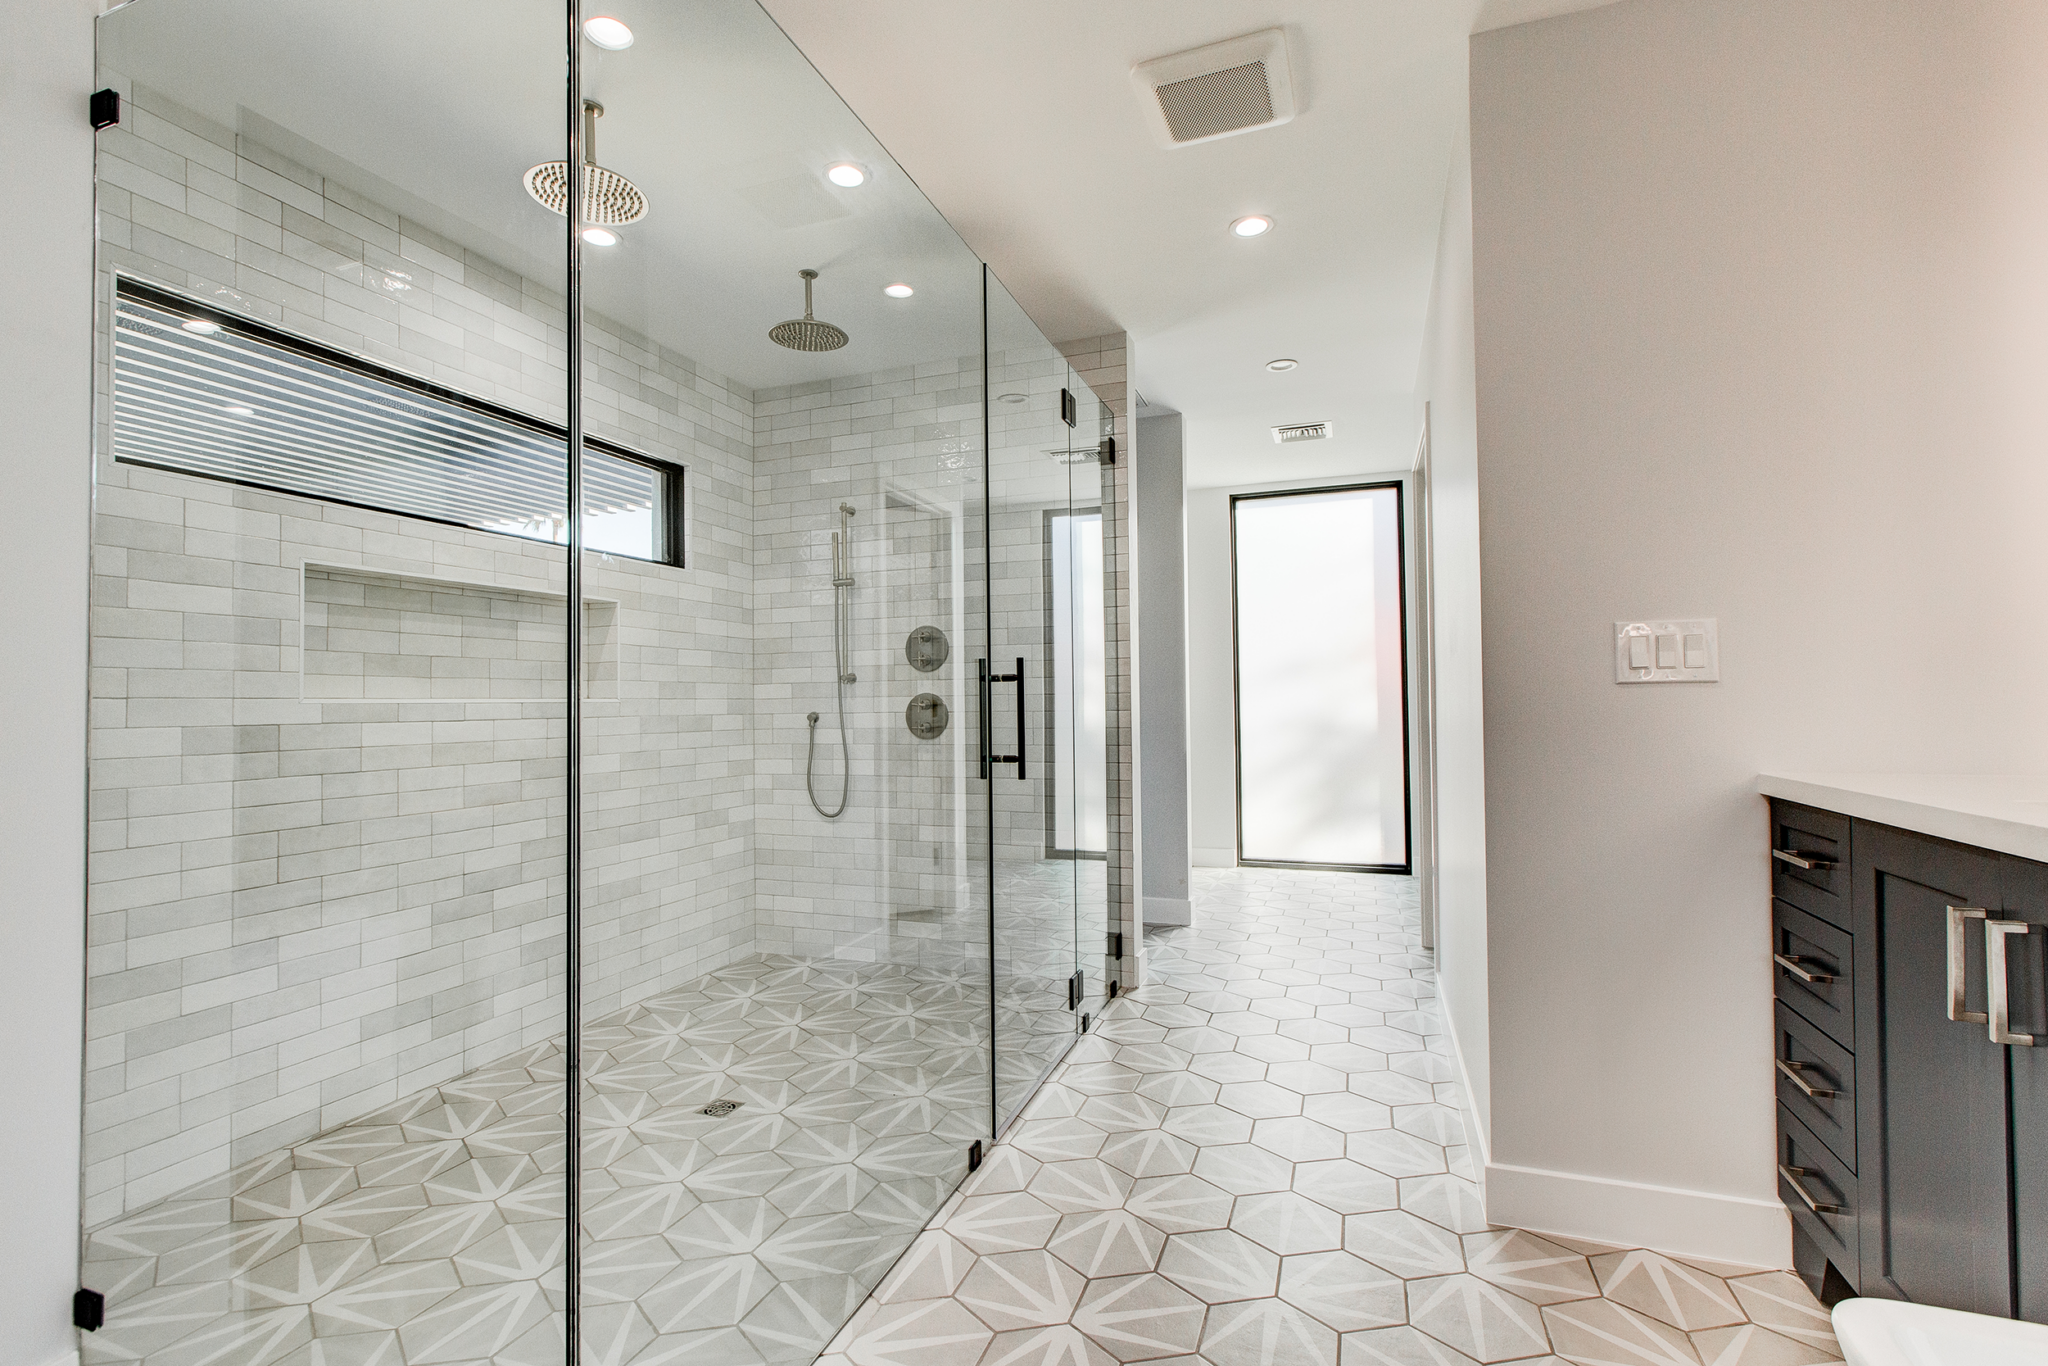 Professional photo of master bathroom for property listing.